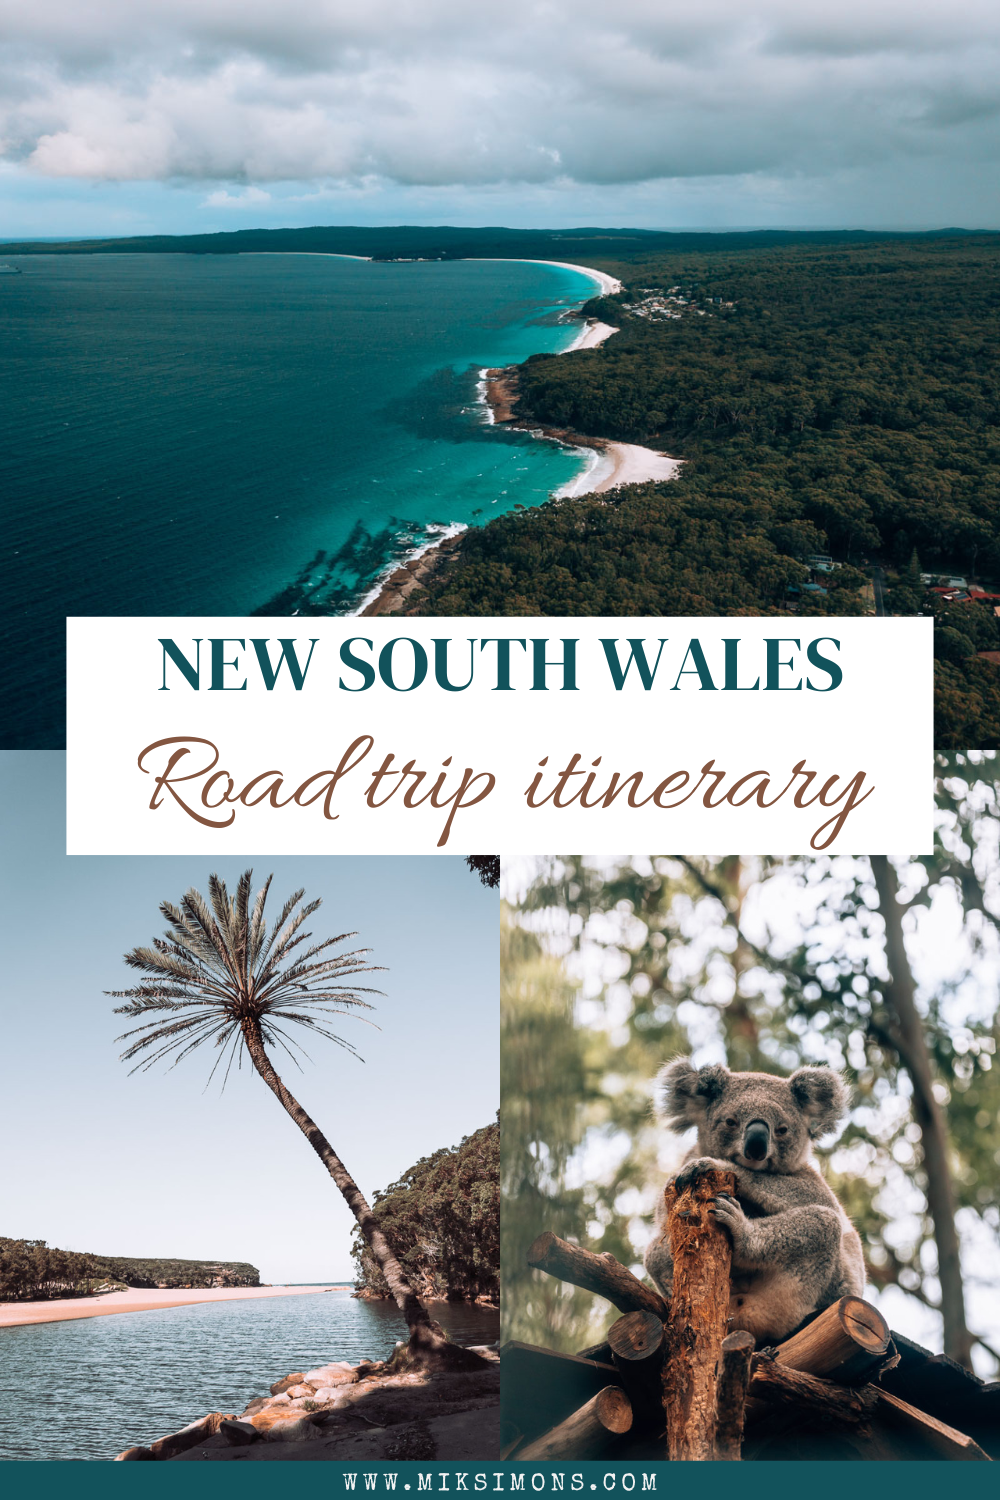 New South Wales Road trip itinerary - Pinterest2